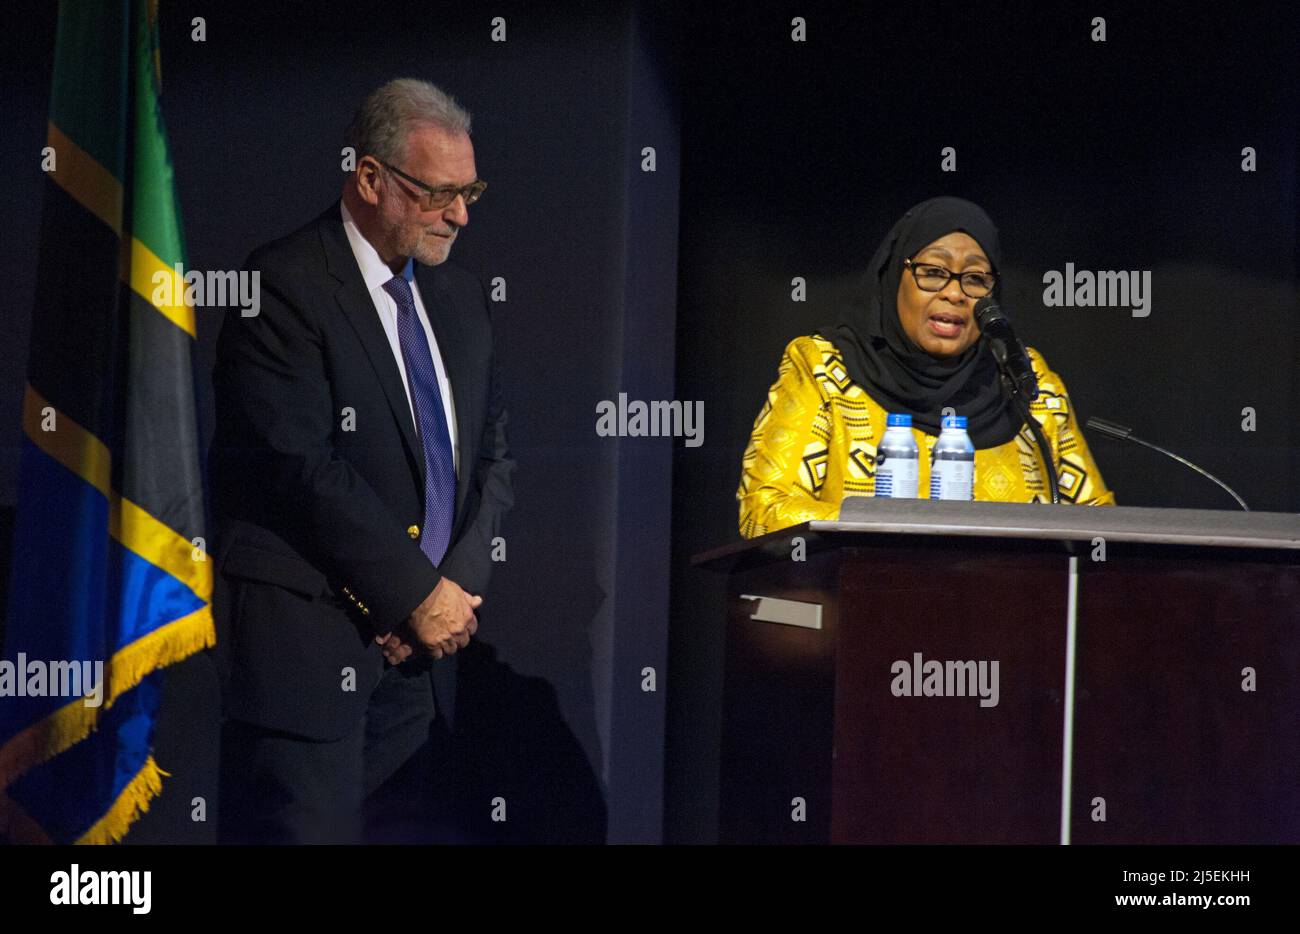 President Samia Suluhu at the West Coast premiere of the documentary PBS television show "Tanzania The Royal Tour" with producer/director Peter Greenberg at the lot at Paramount Studios in Hollywood, CA.  2022 Stock Photo